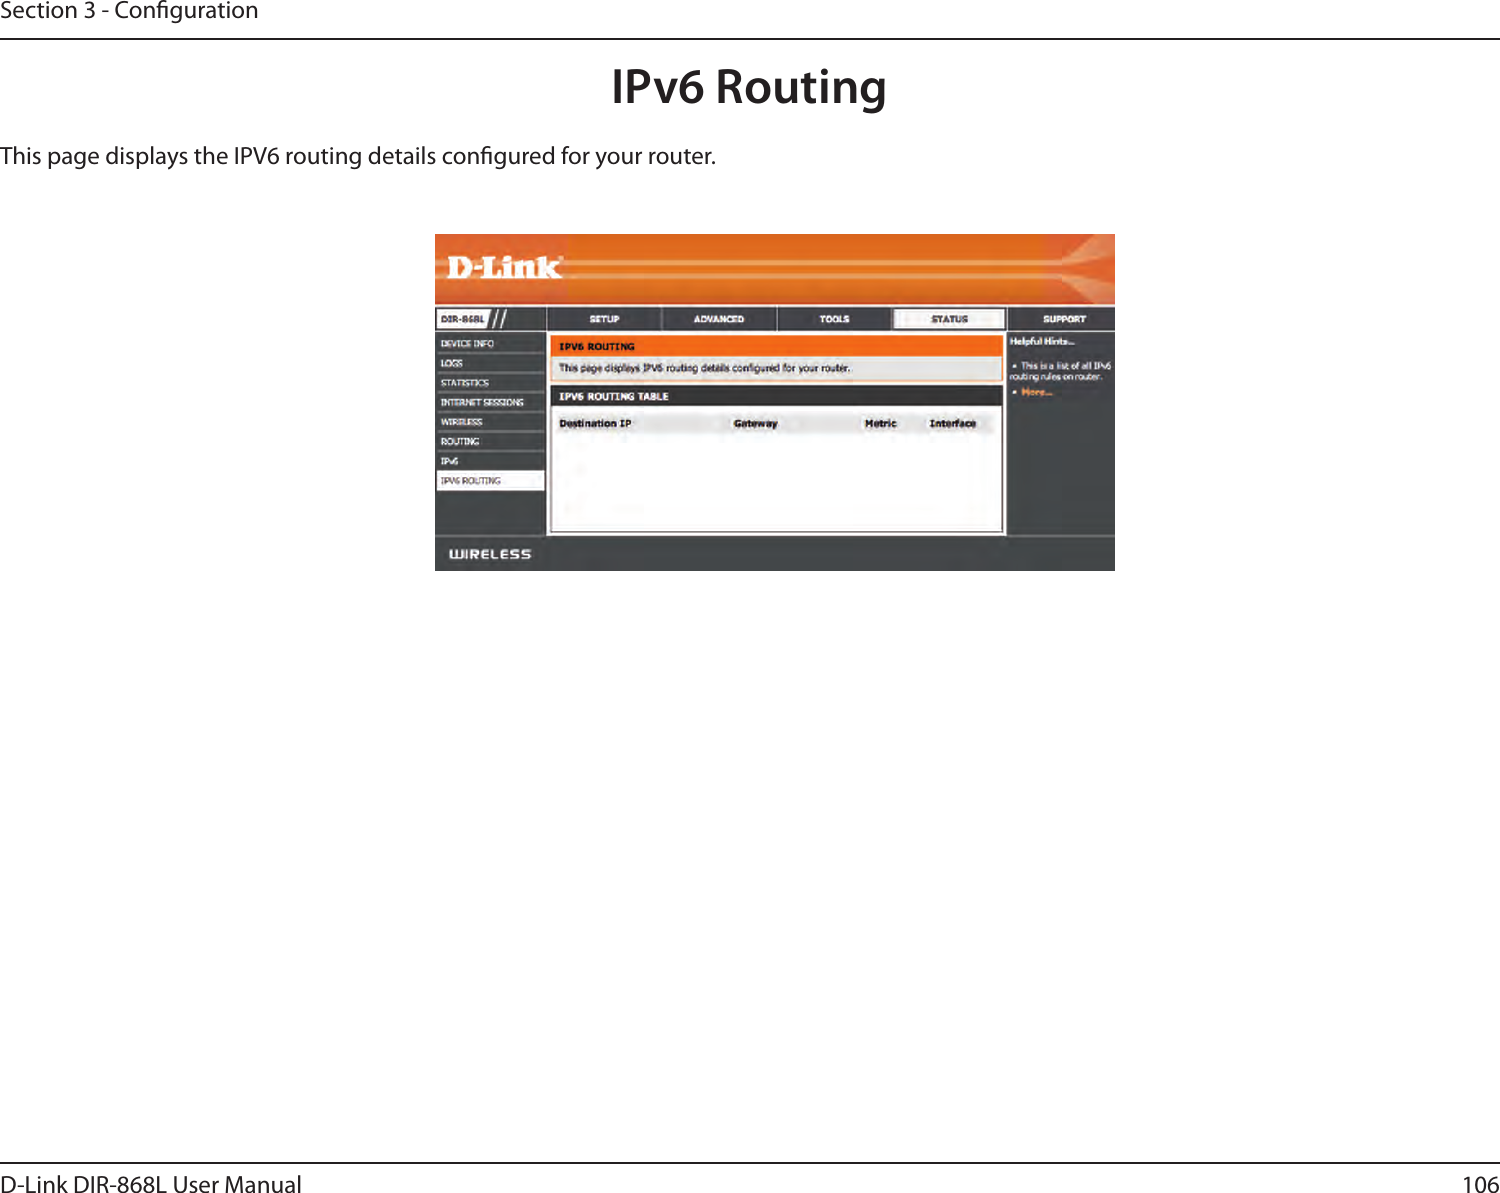 106D-Link DIR-868L User ManualSection 3 - CongurationIPv6 RoutingThis page displays the IPV6 routing details congured for your router. 